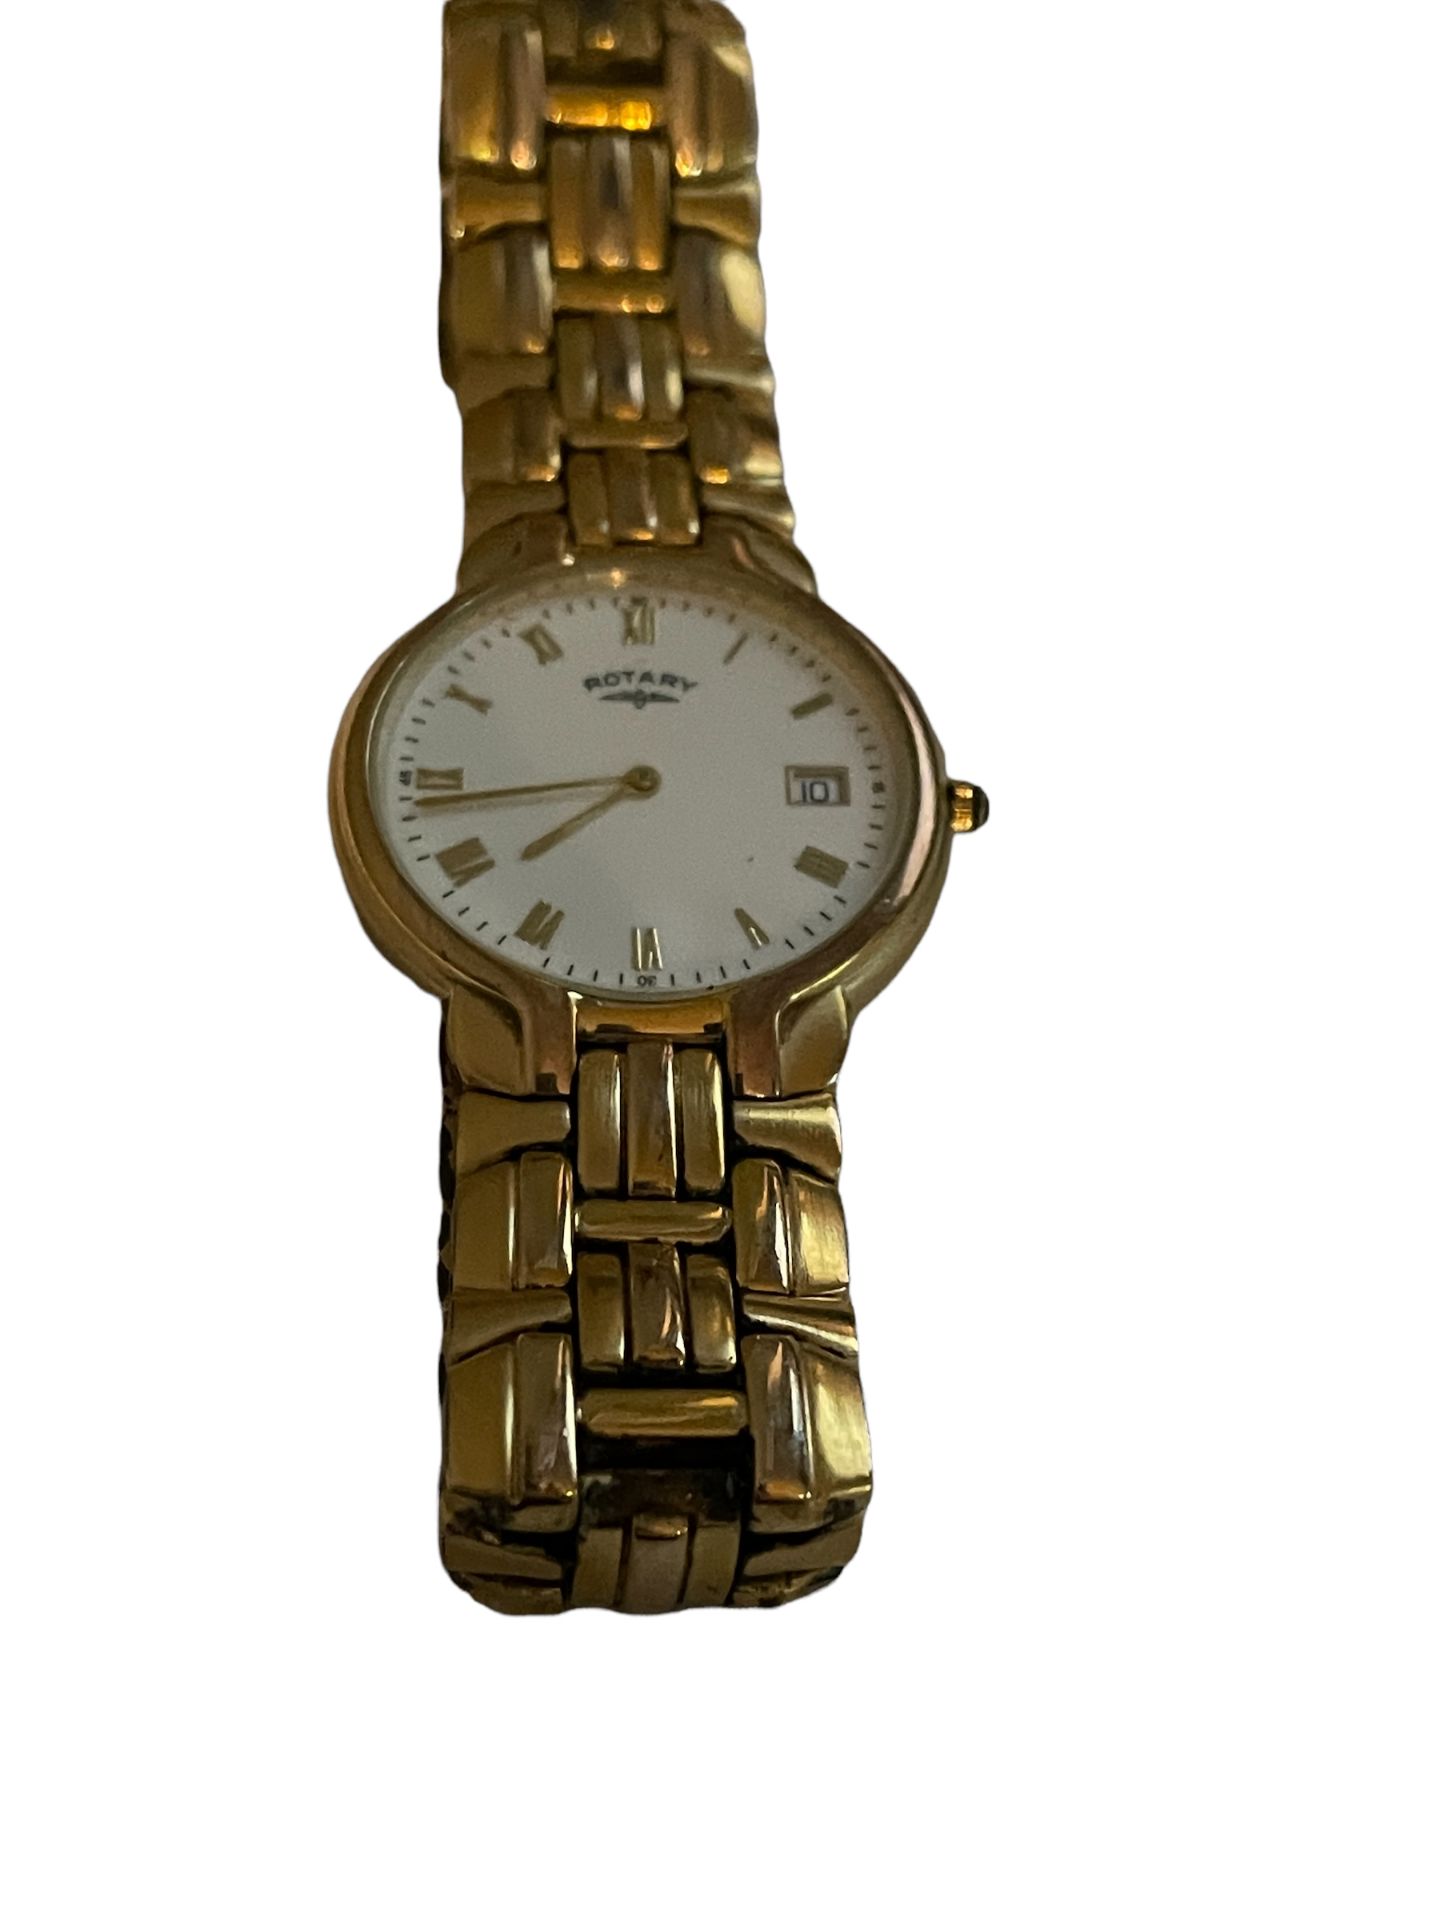 Mens Rotary Gold Plated Watch - Return Stock from our Private Jet Charter - Image 13 of 14